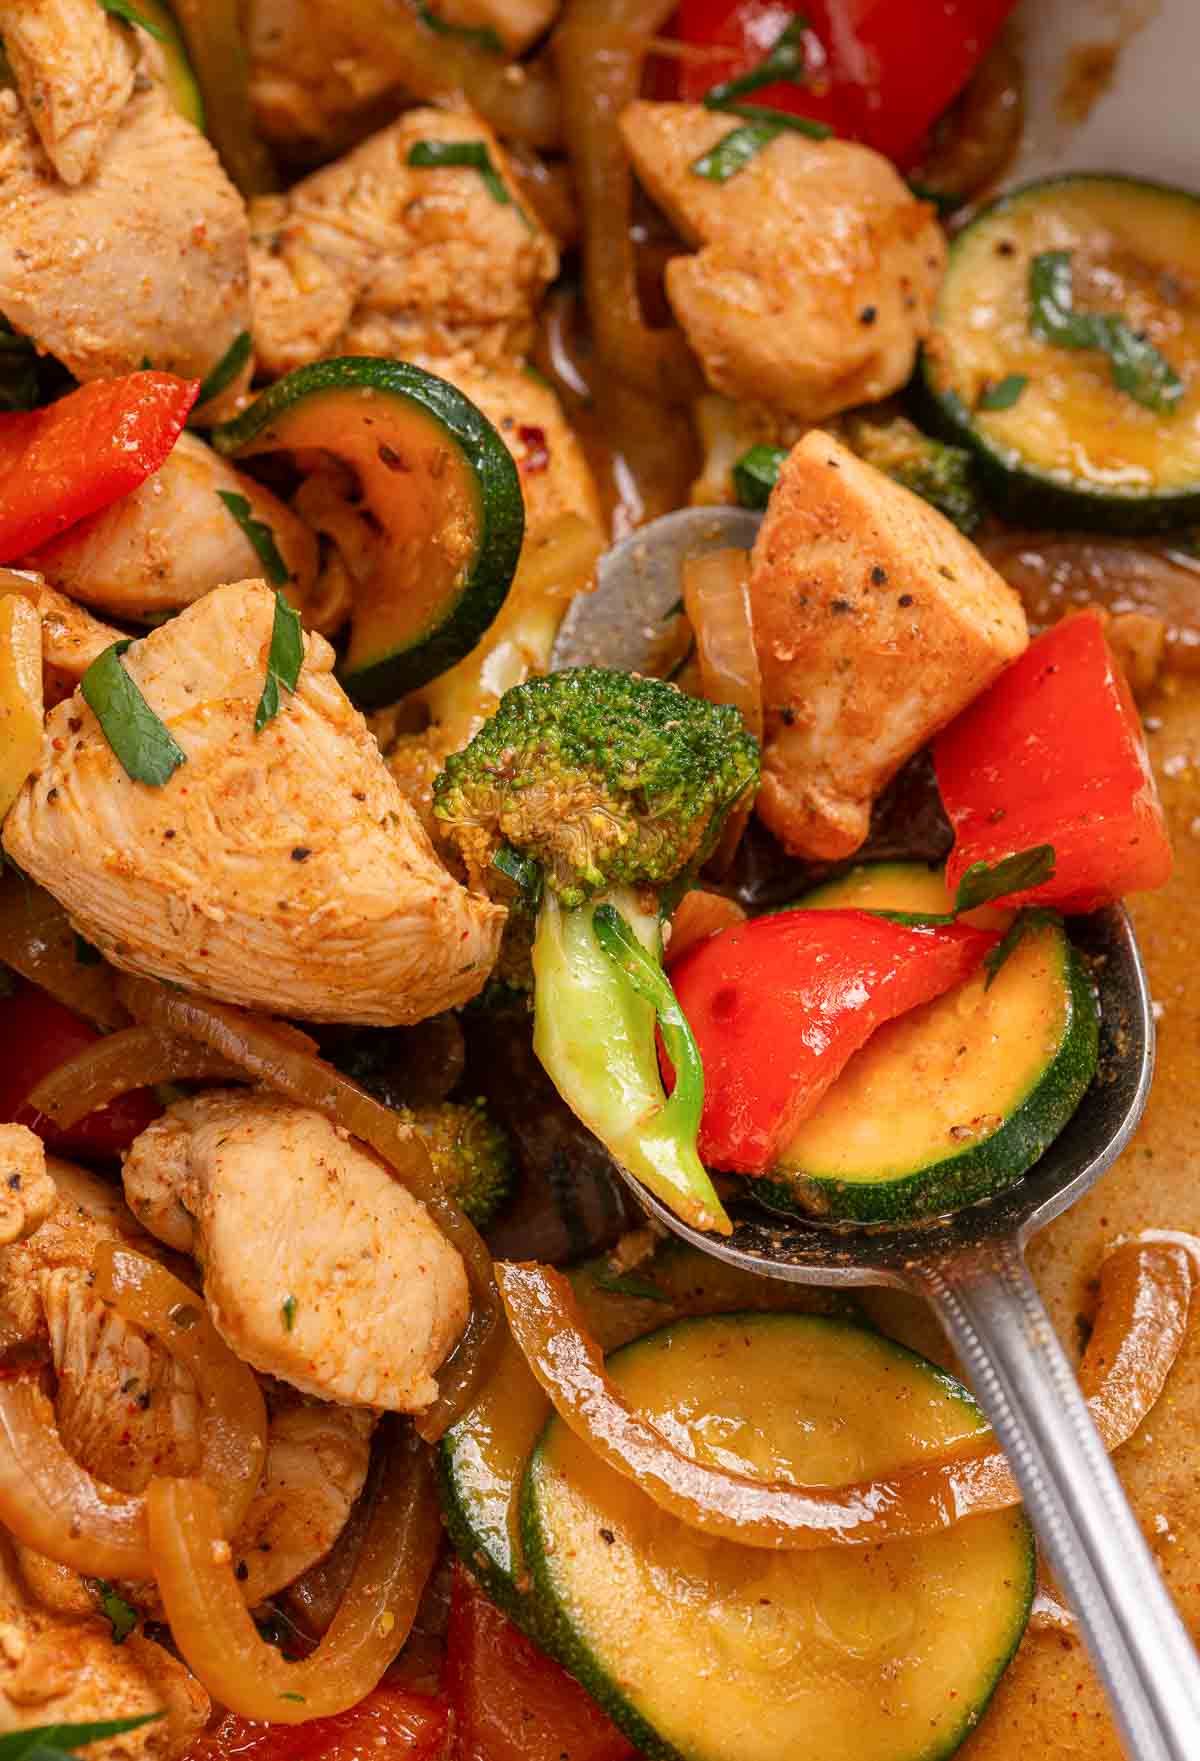 A skillet with chicken and stir-fried vegetables.